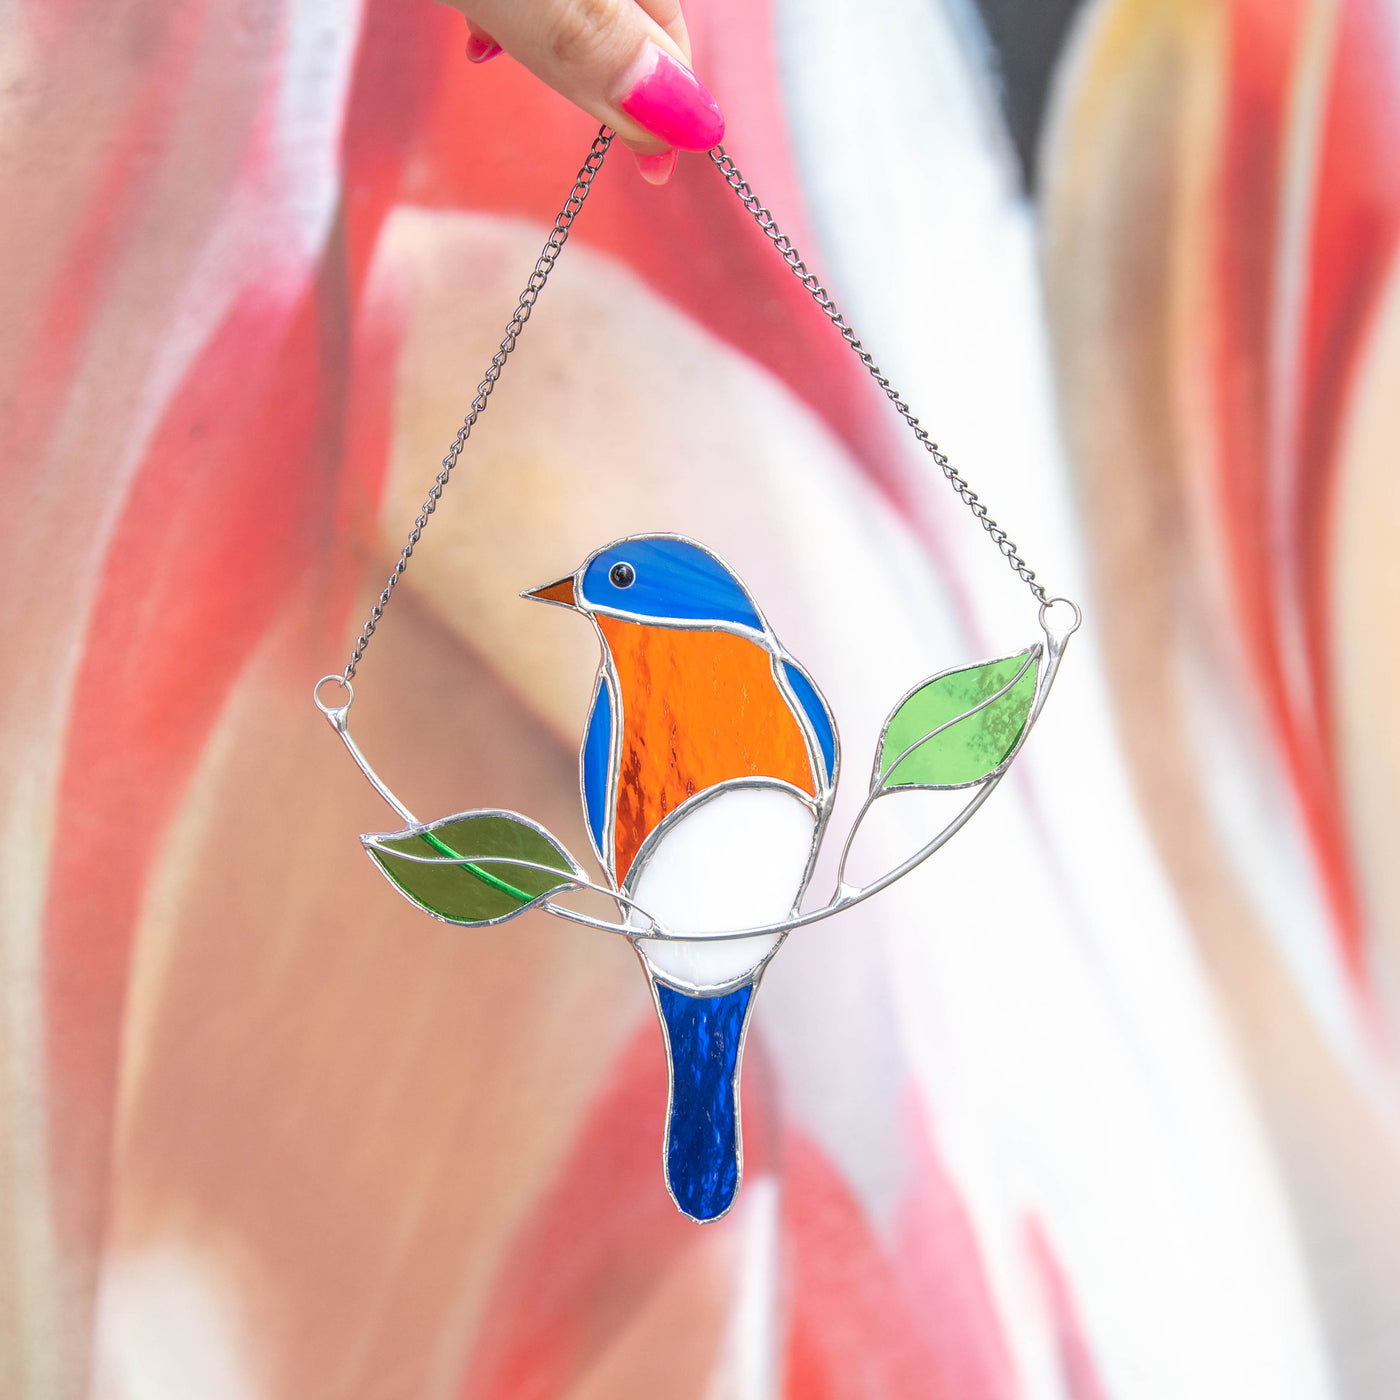 Stained glass bluebird on the chain suncatcher